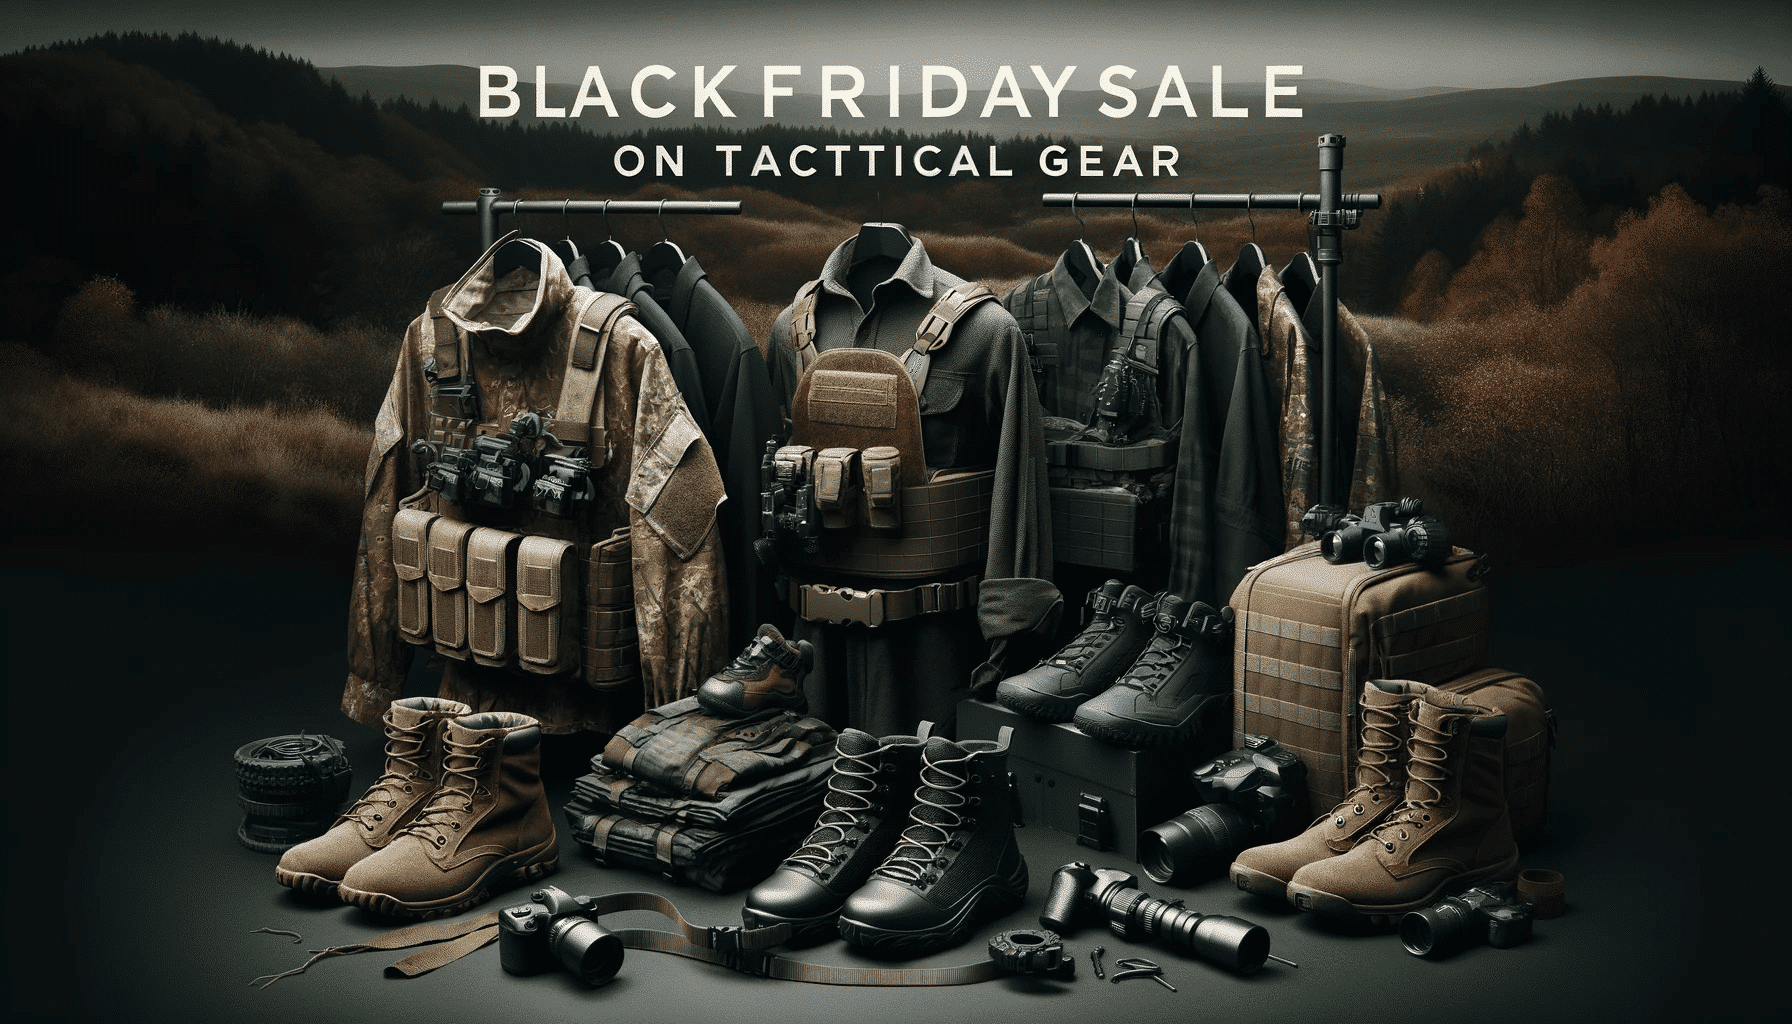 Black Friday Sale on Tactical Gear